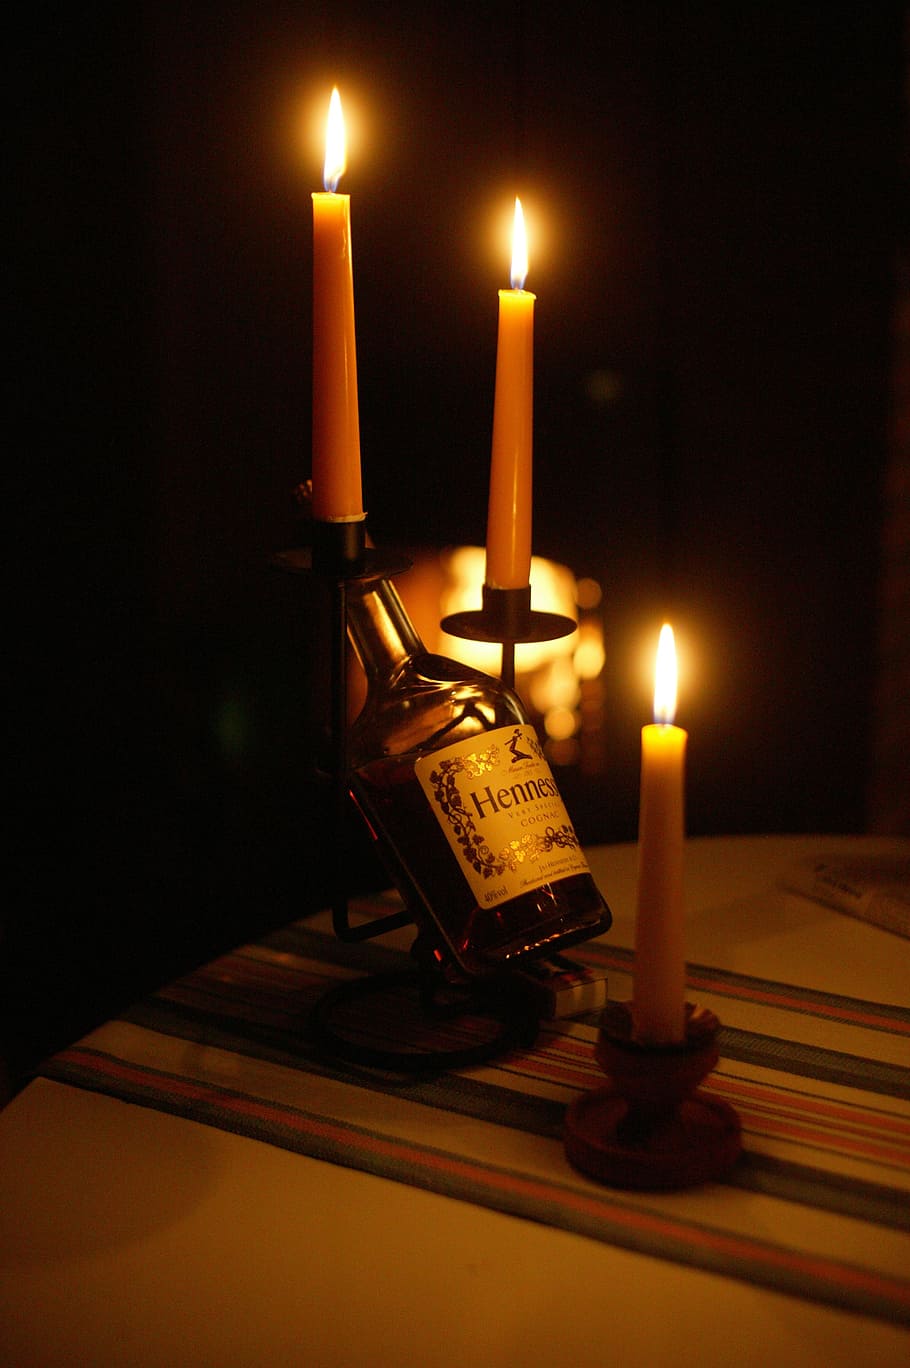 close-up photography, black, white, label bottle, pillar candles, Cognac, Brandy, Candles, Hennessy, Light